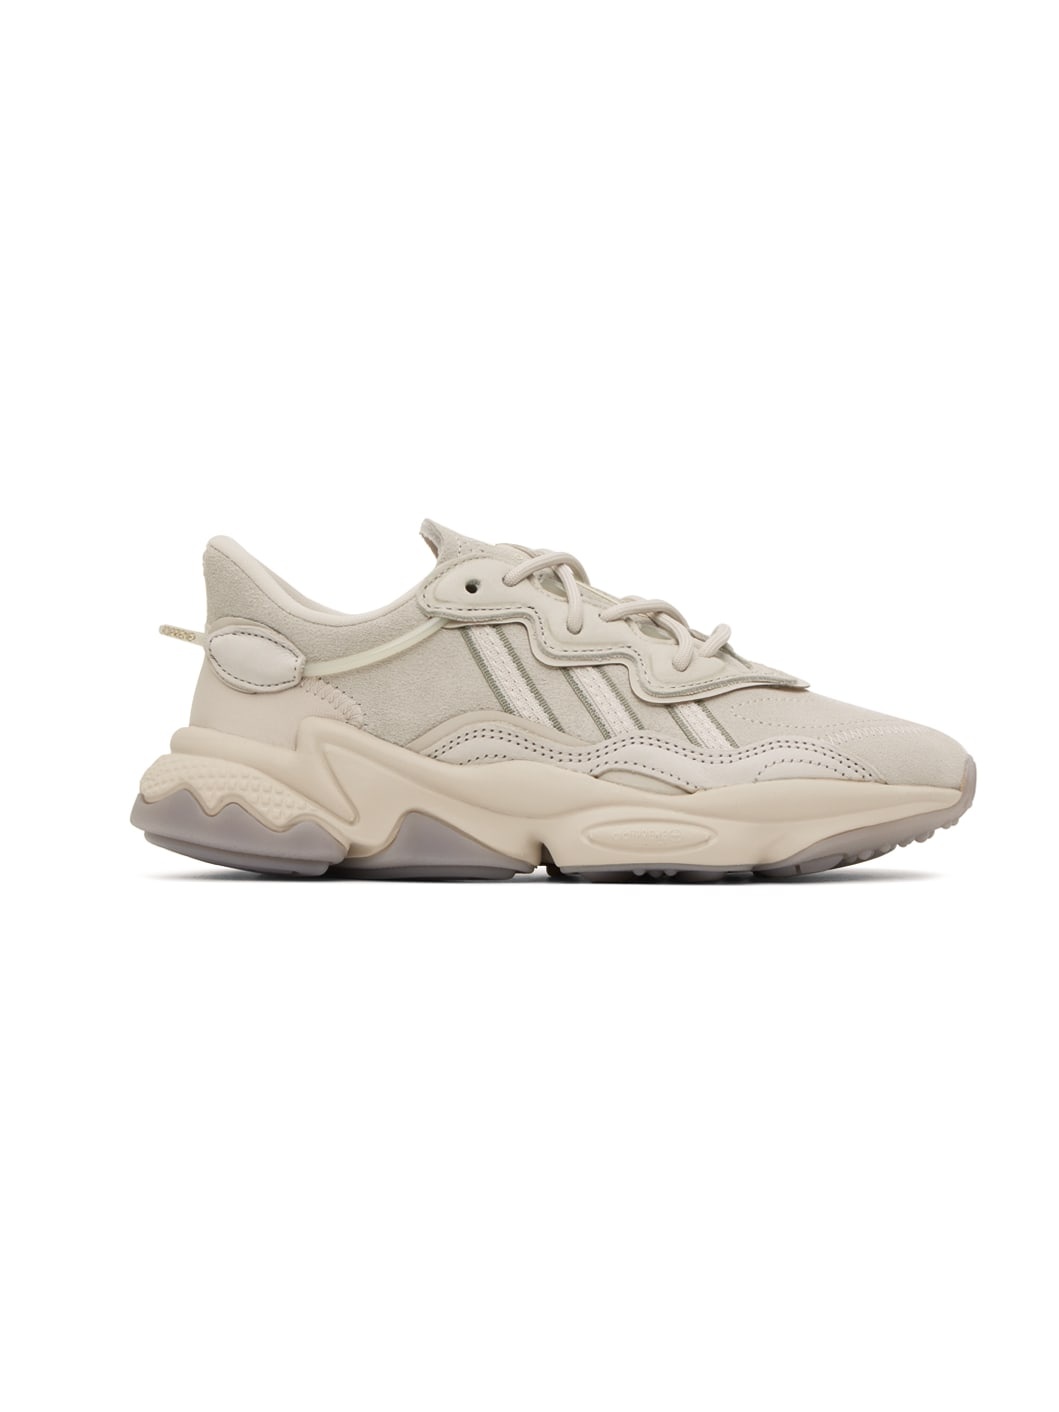 Off-White Ozweego Sneakers - 1